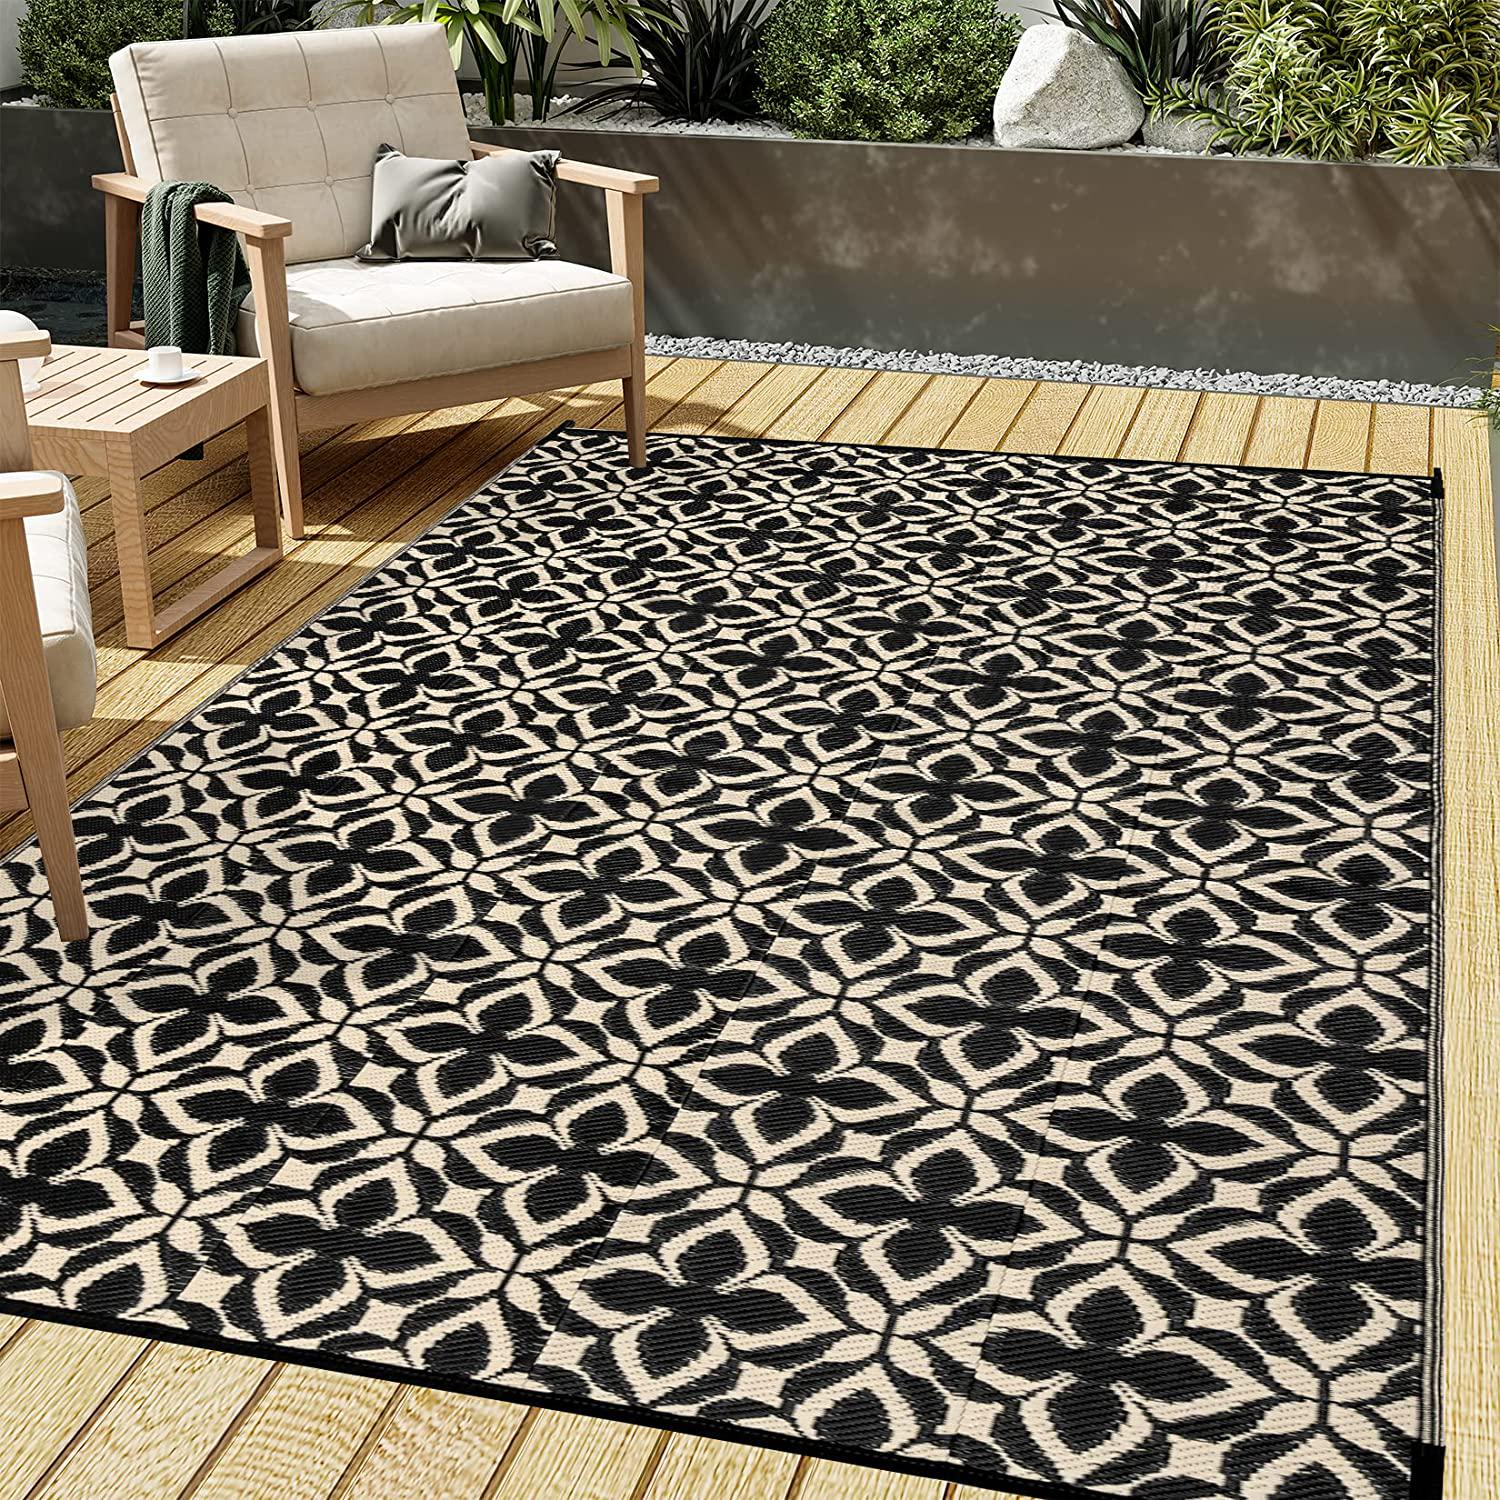 HUGEAR Outdoor Rug for Patios Clearance,Waterproof Mat,Large Outside Carpet,Reversible Plastic Straw Camping Rugs,Rv,Porch,Deck,Camper,Balcony,Backyard (5x8,Clover A/Black&Beige)-